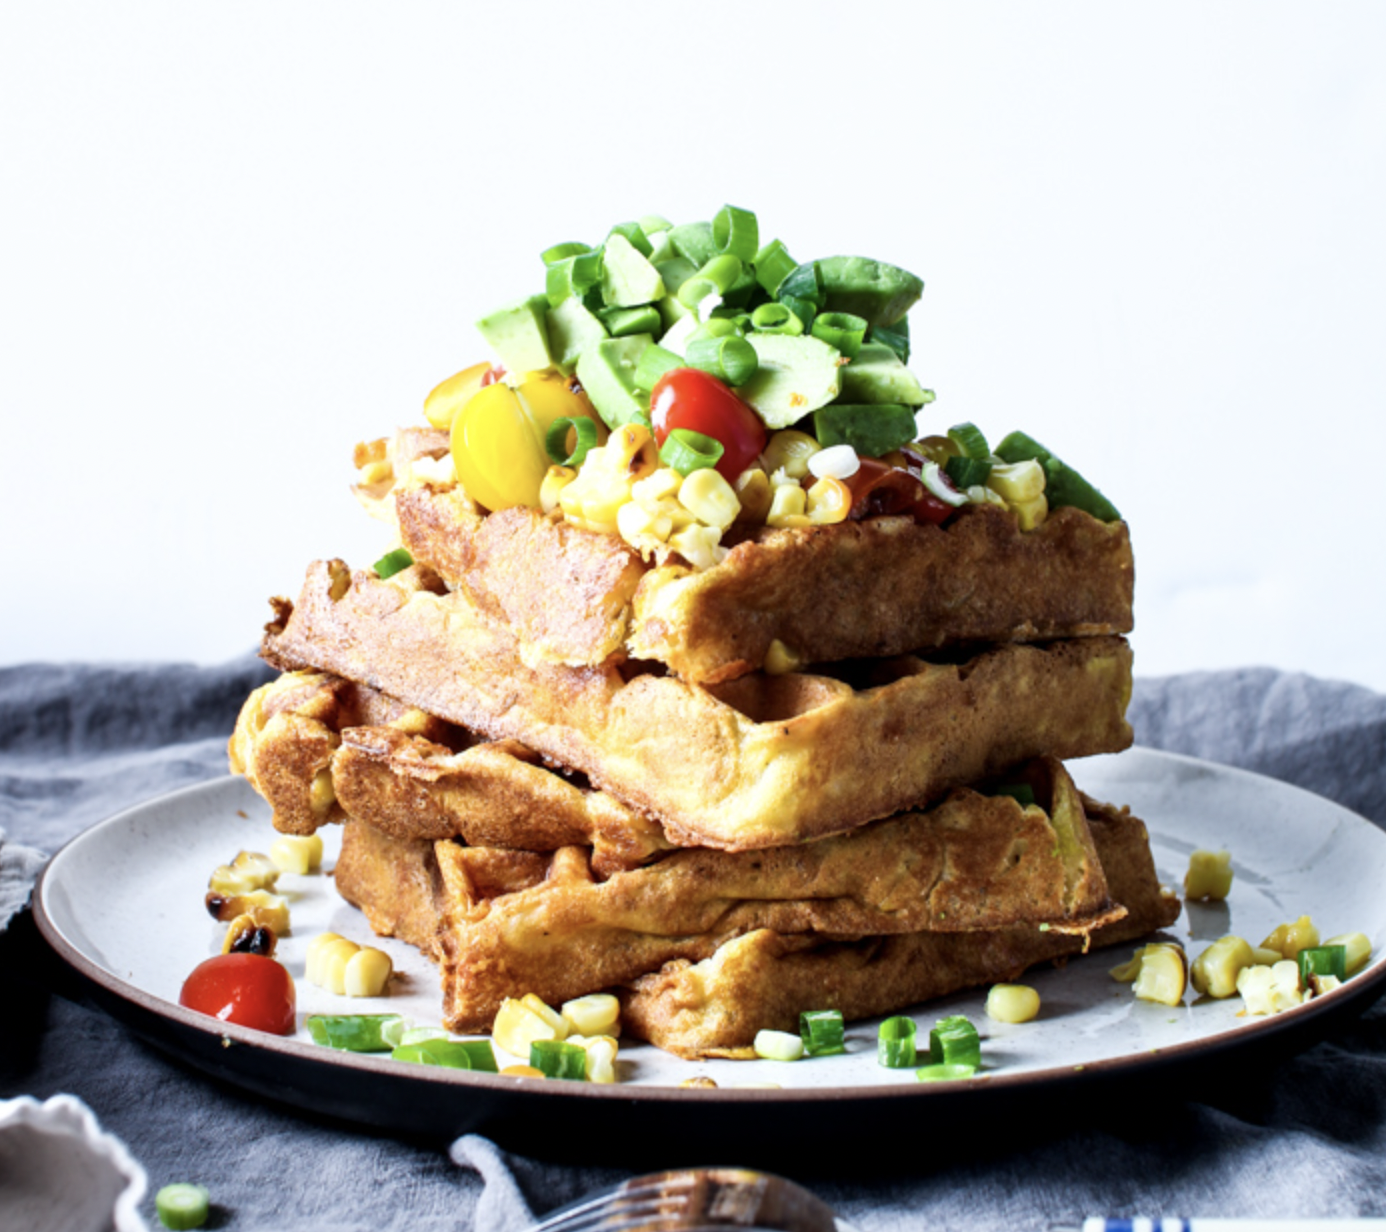 Savory Corn and Cheddar Waffles with Avocado